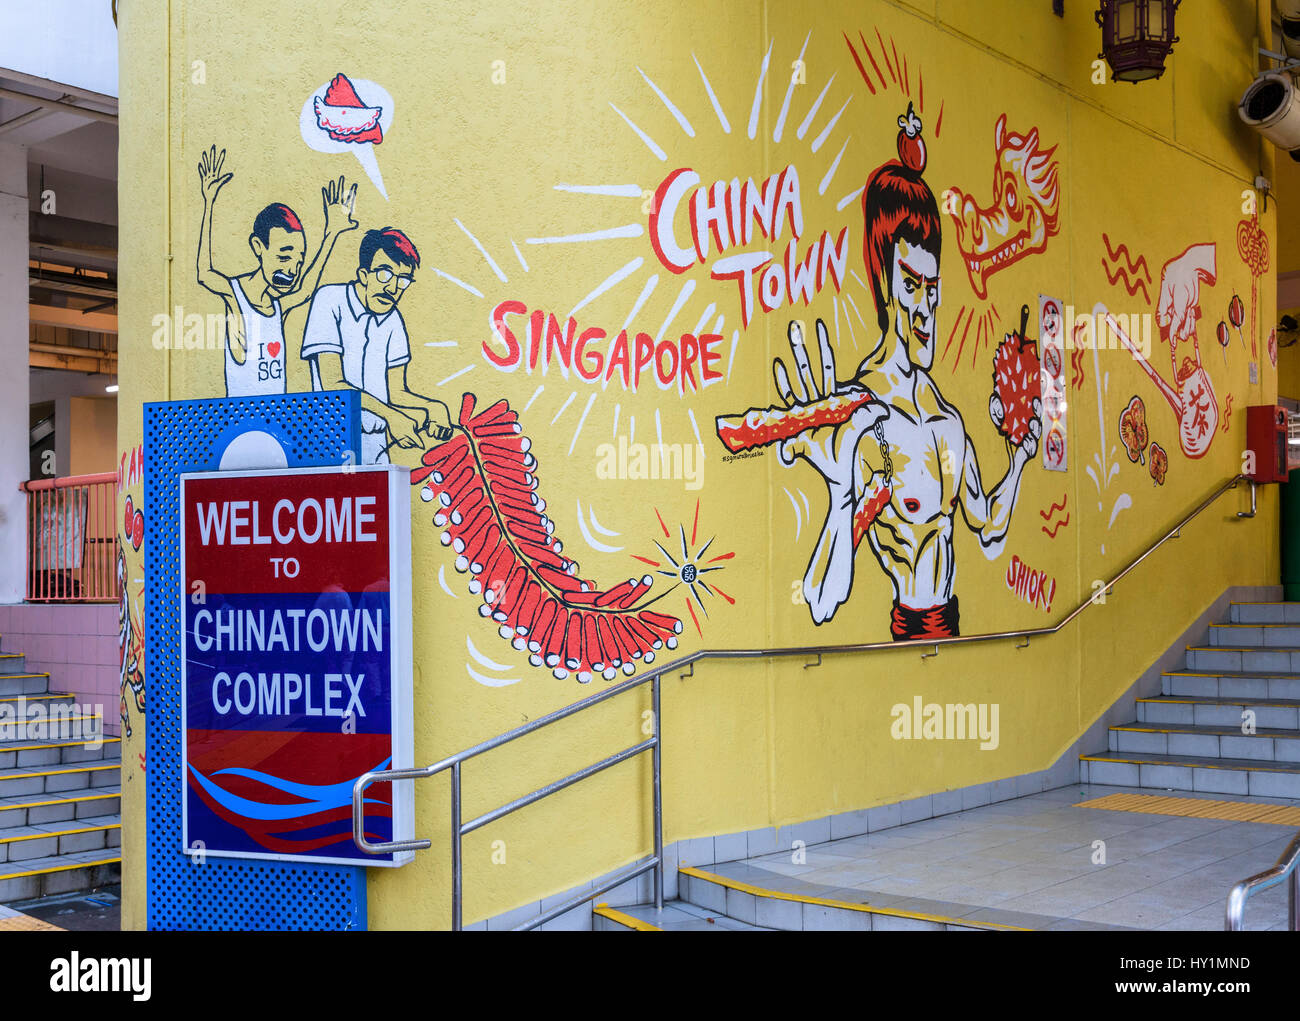 Wall mural graffiti art at the entrance to the Chinatown Complex, Chinatown, Singapore Stock Photo